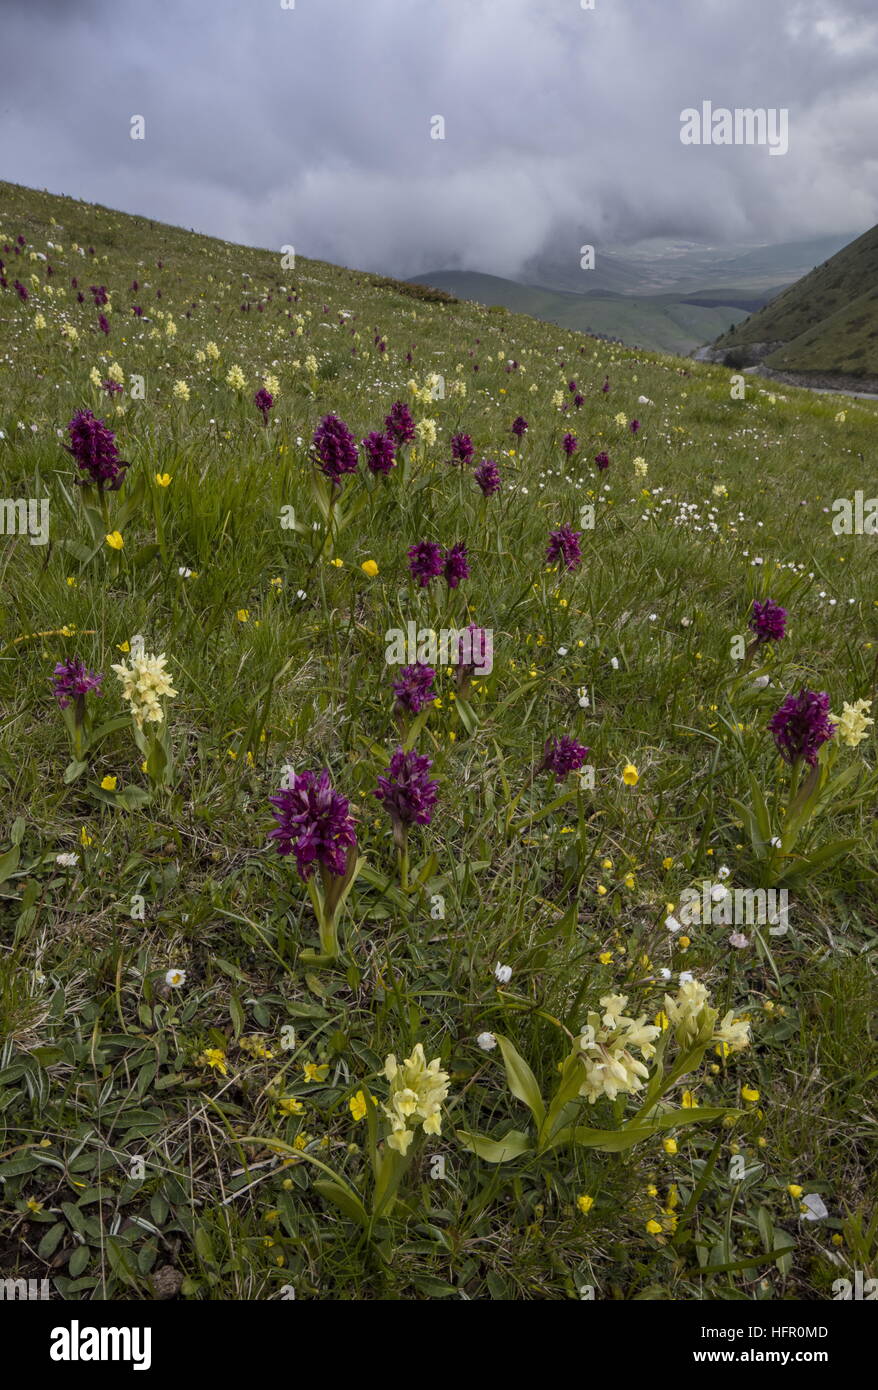 Elder-flowered orchids, Dactylorhiza sambucina, in both colours at 1750m in high pasture, Monti Sibillini National Park, Apennines, Italy. Stock Photo